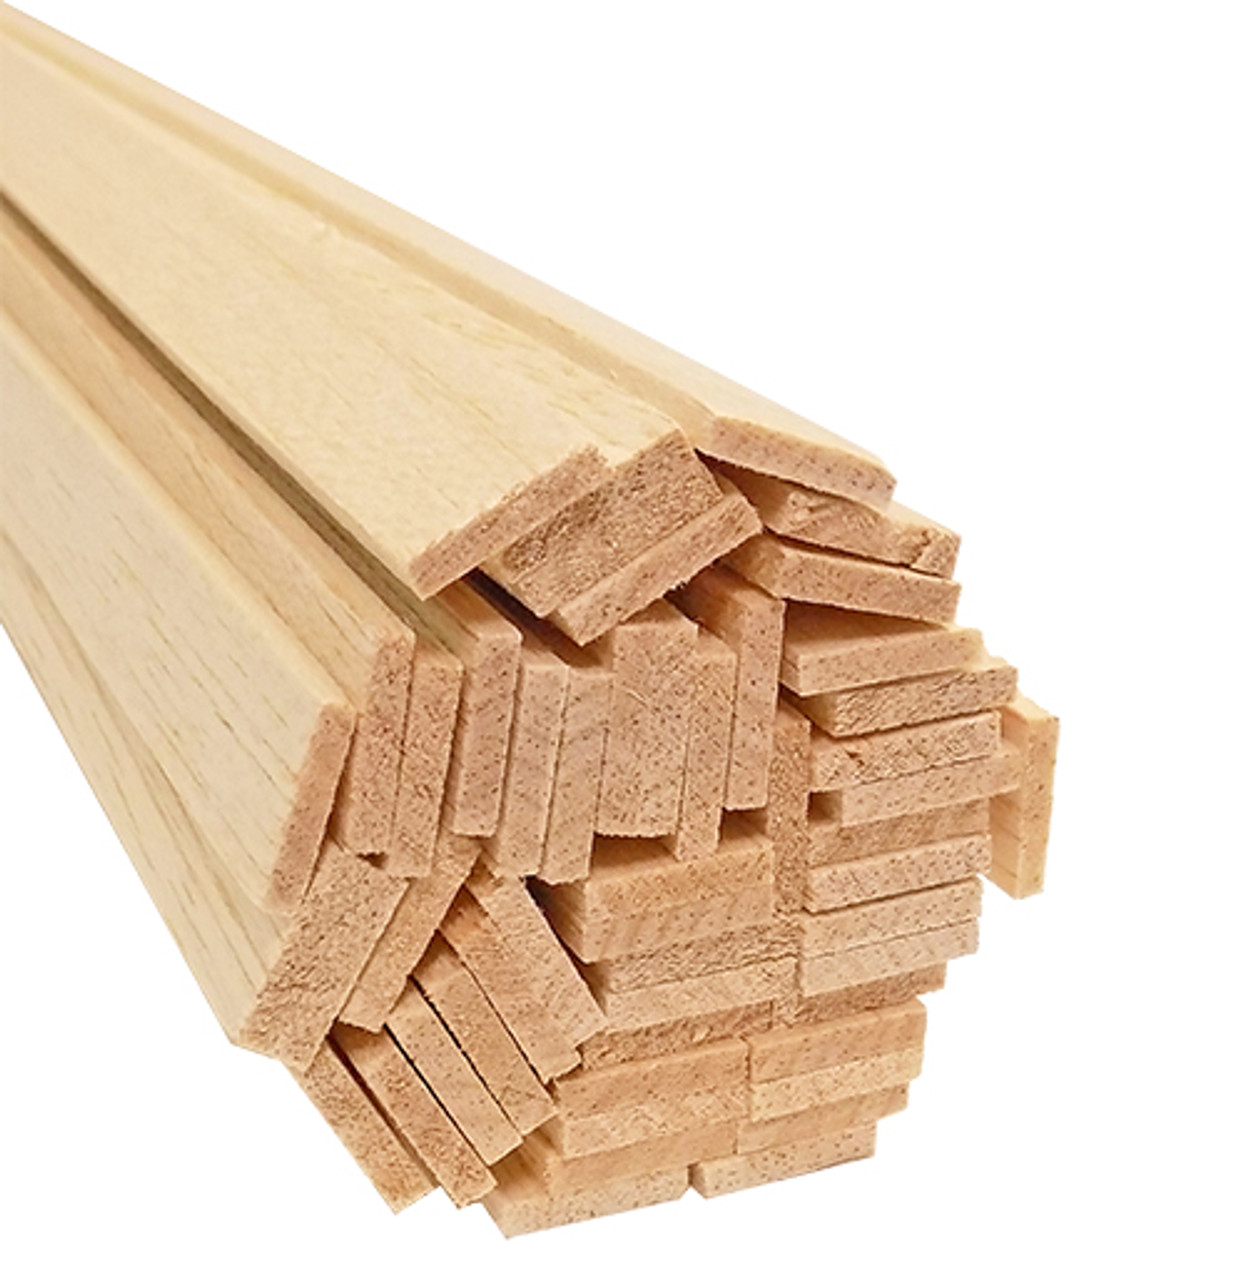 Cherry Wood Strips 5 Pieces 1/8 X 1/4 X 18 Long Crafts Models